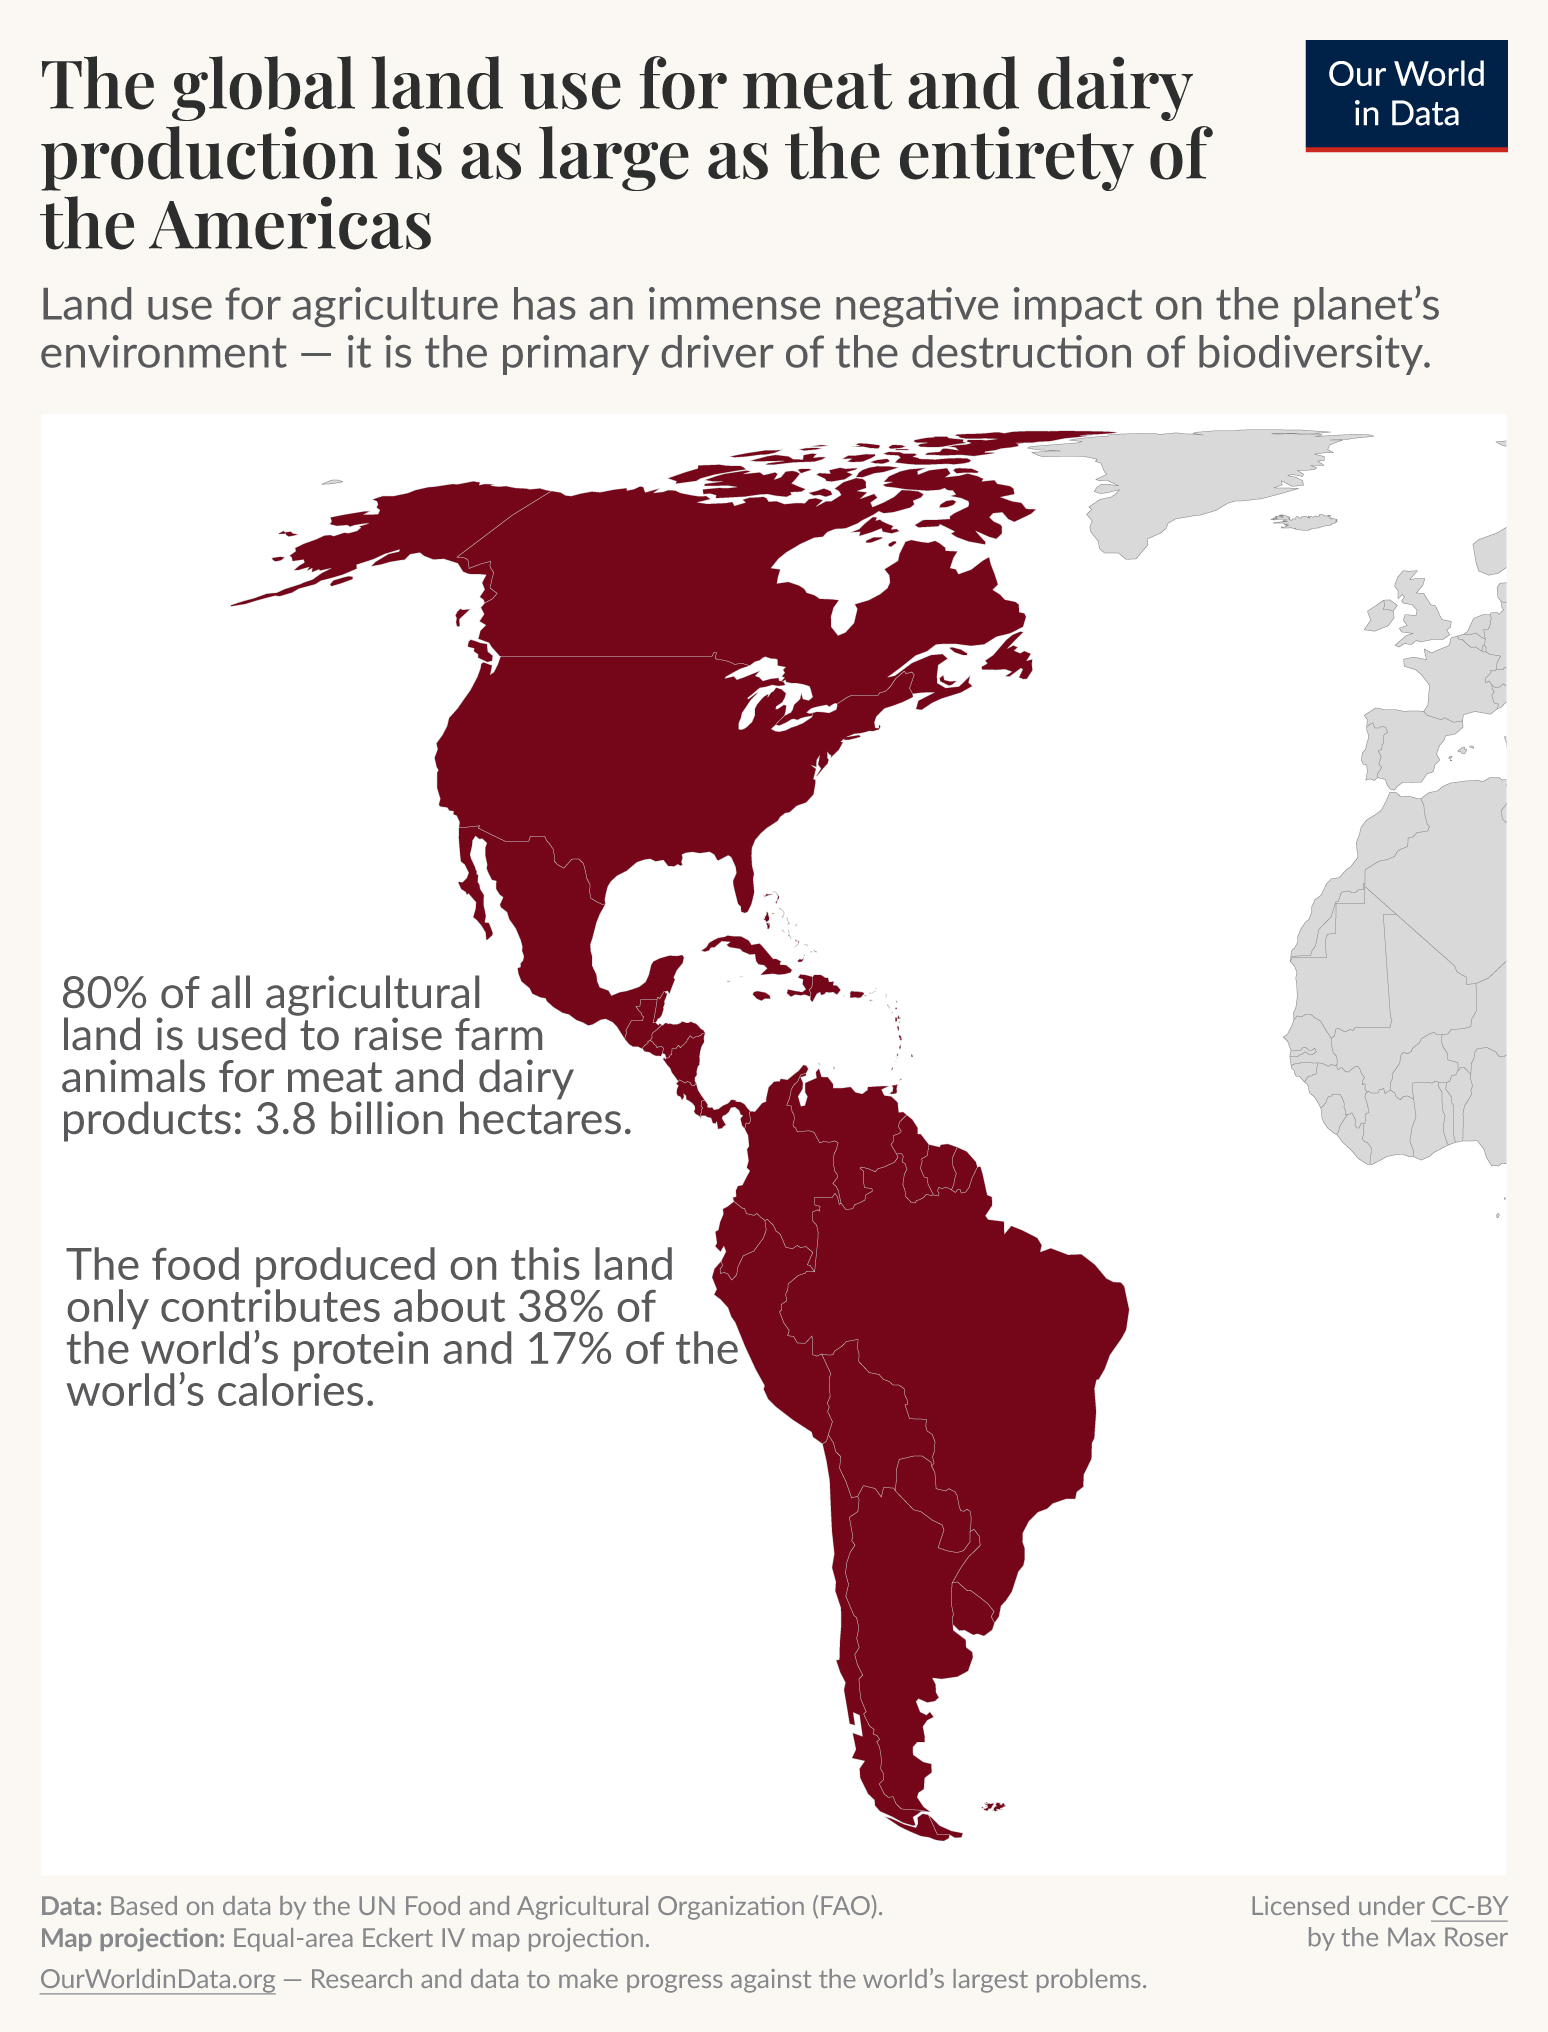 38 million km² of our planet's land is used for the production of meat and dairy — either as grazing land or cropland to grow animal feed.

This is an area as large as the entirety of the Americas.